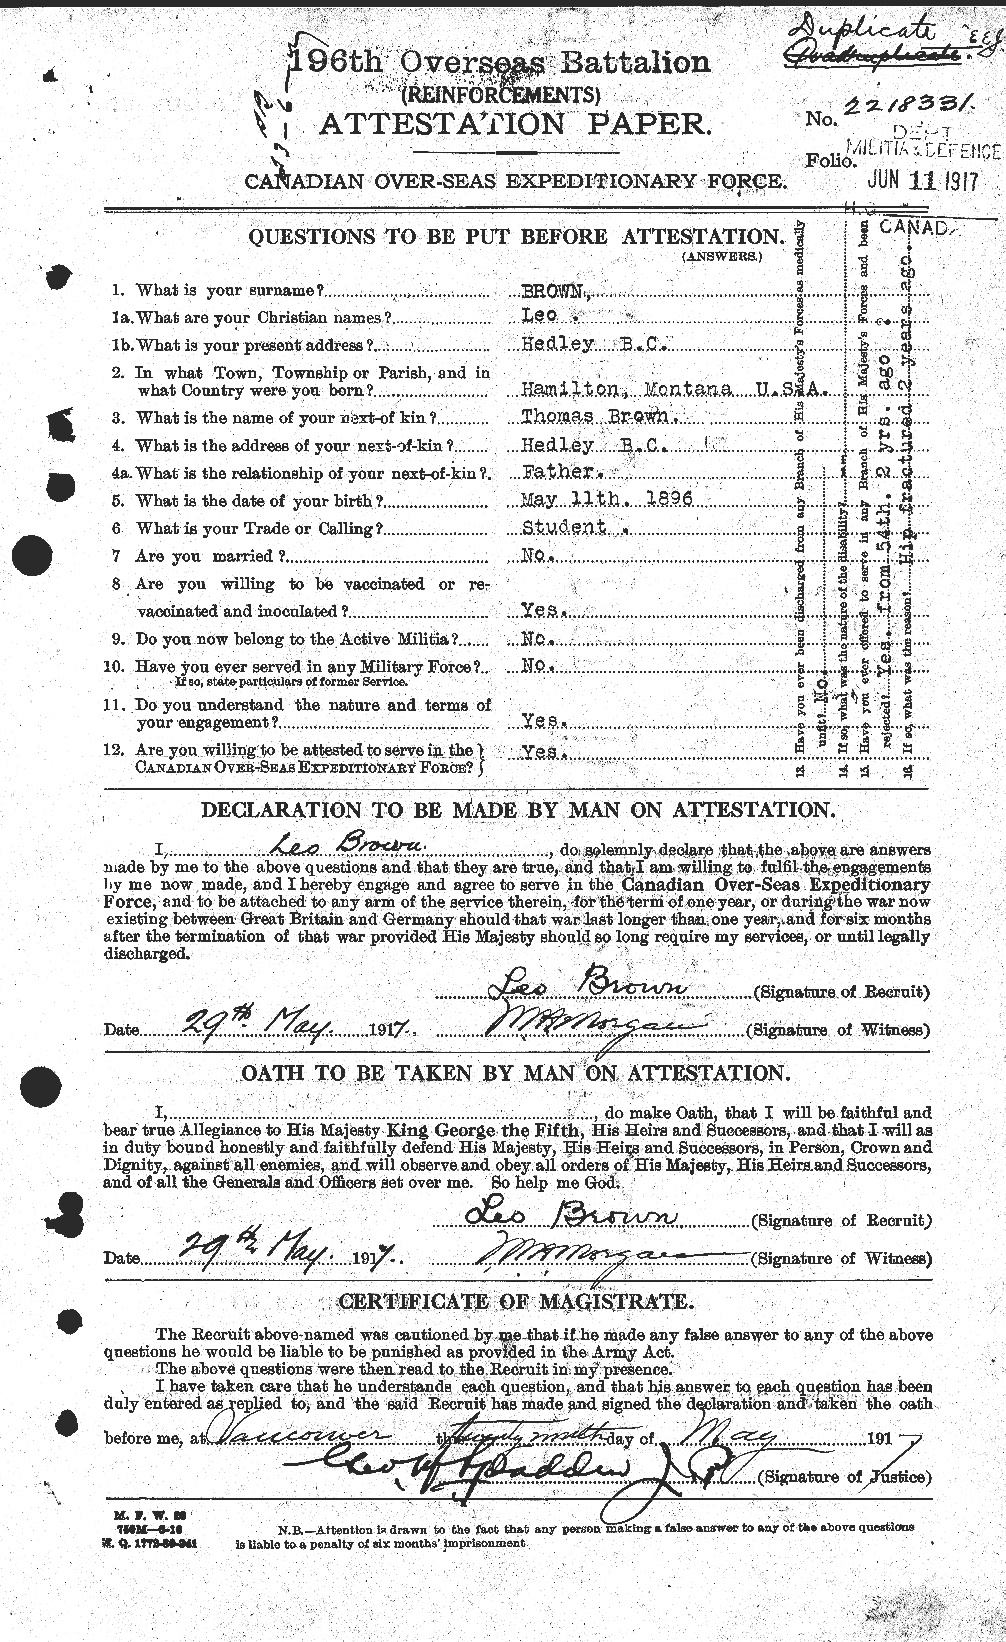 Personnel Records of the First World War - CEF 266281a